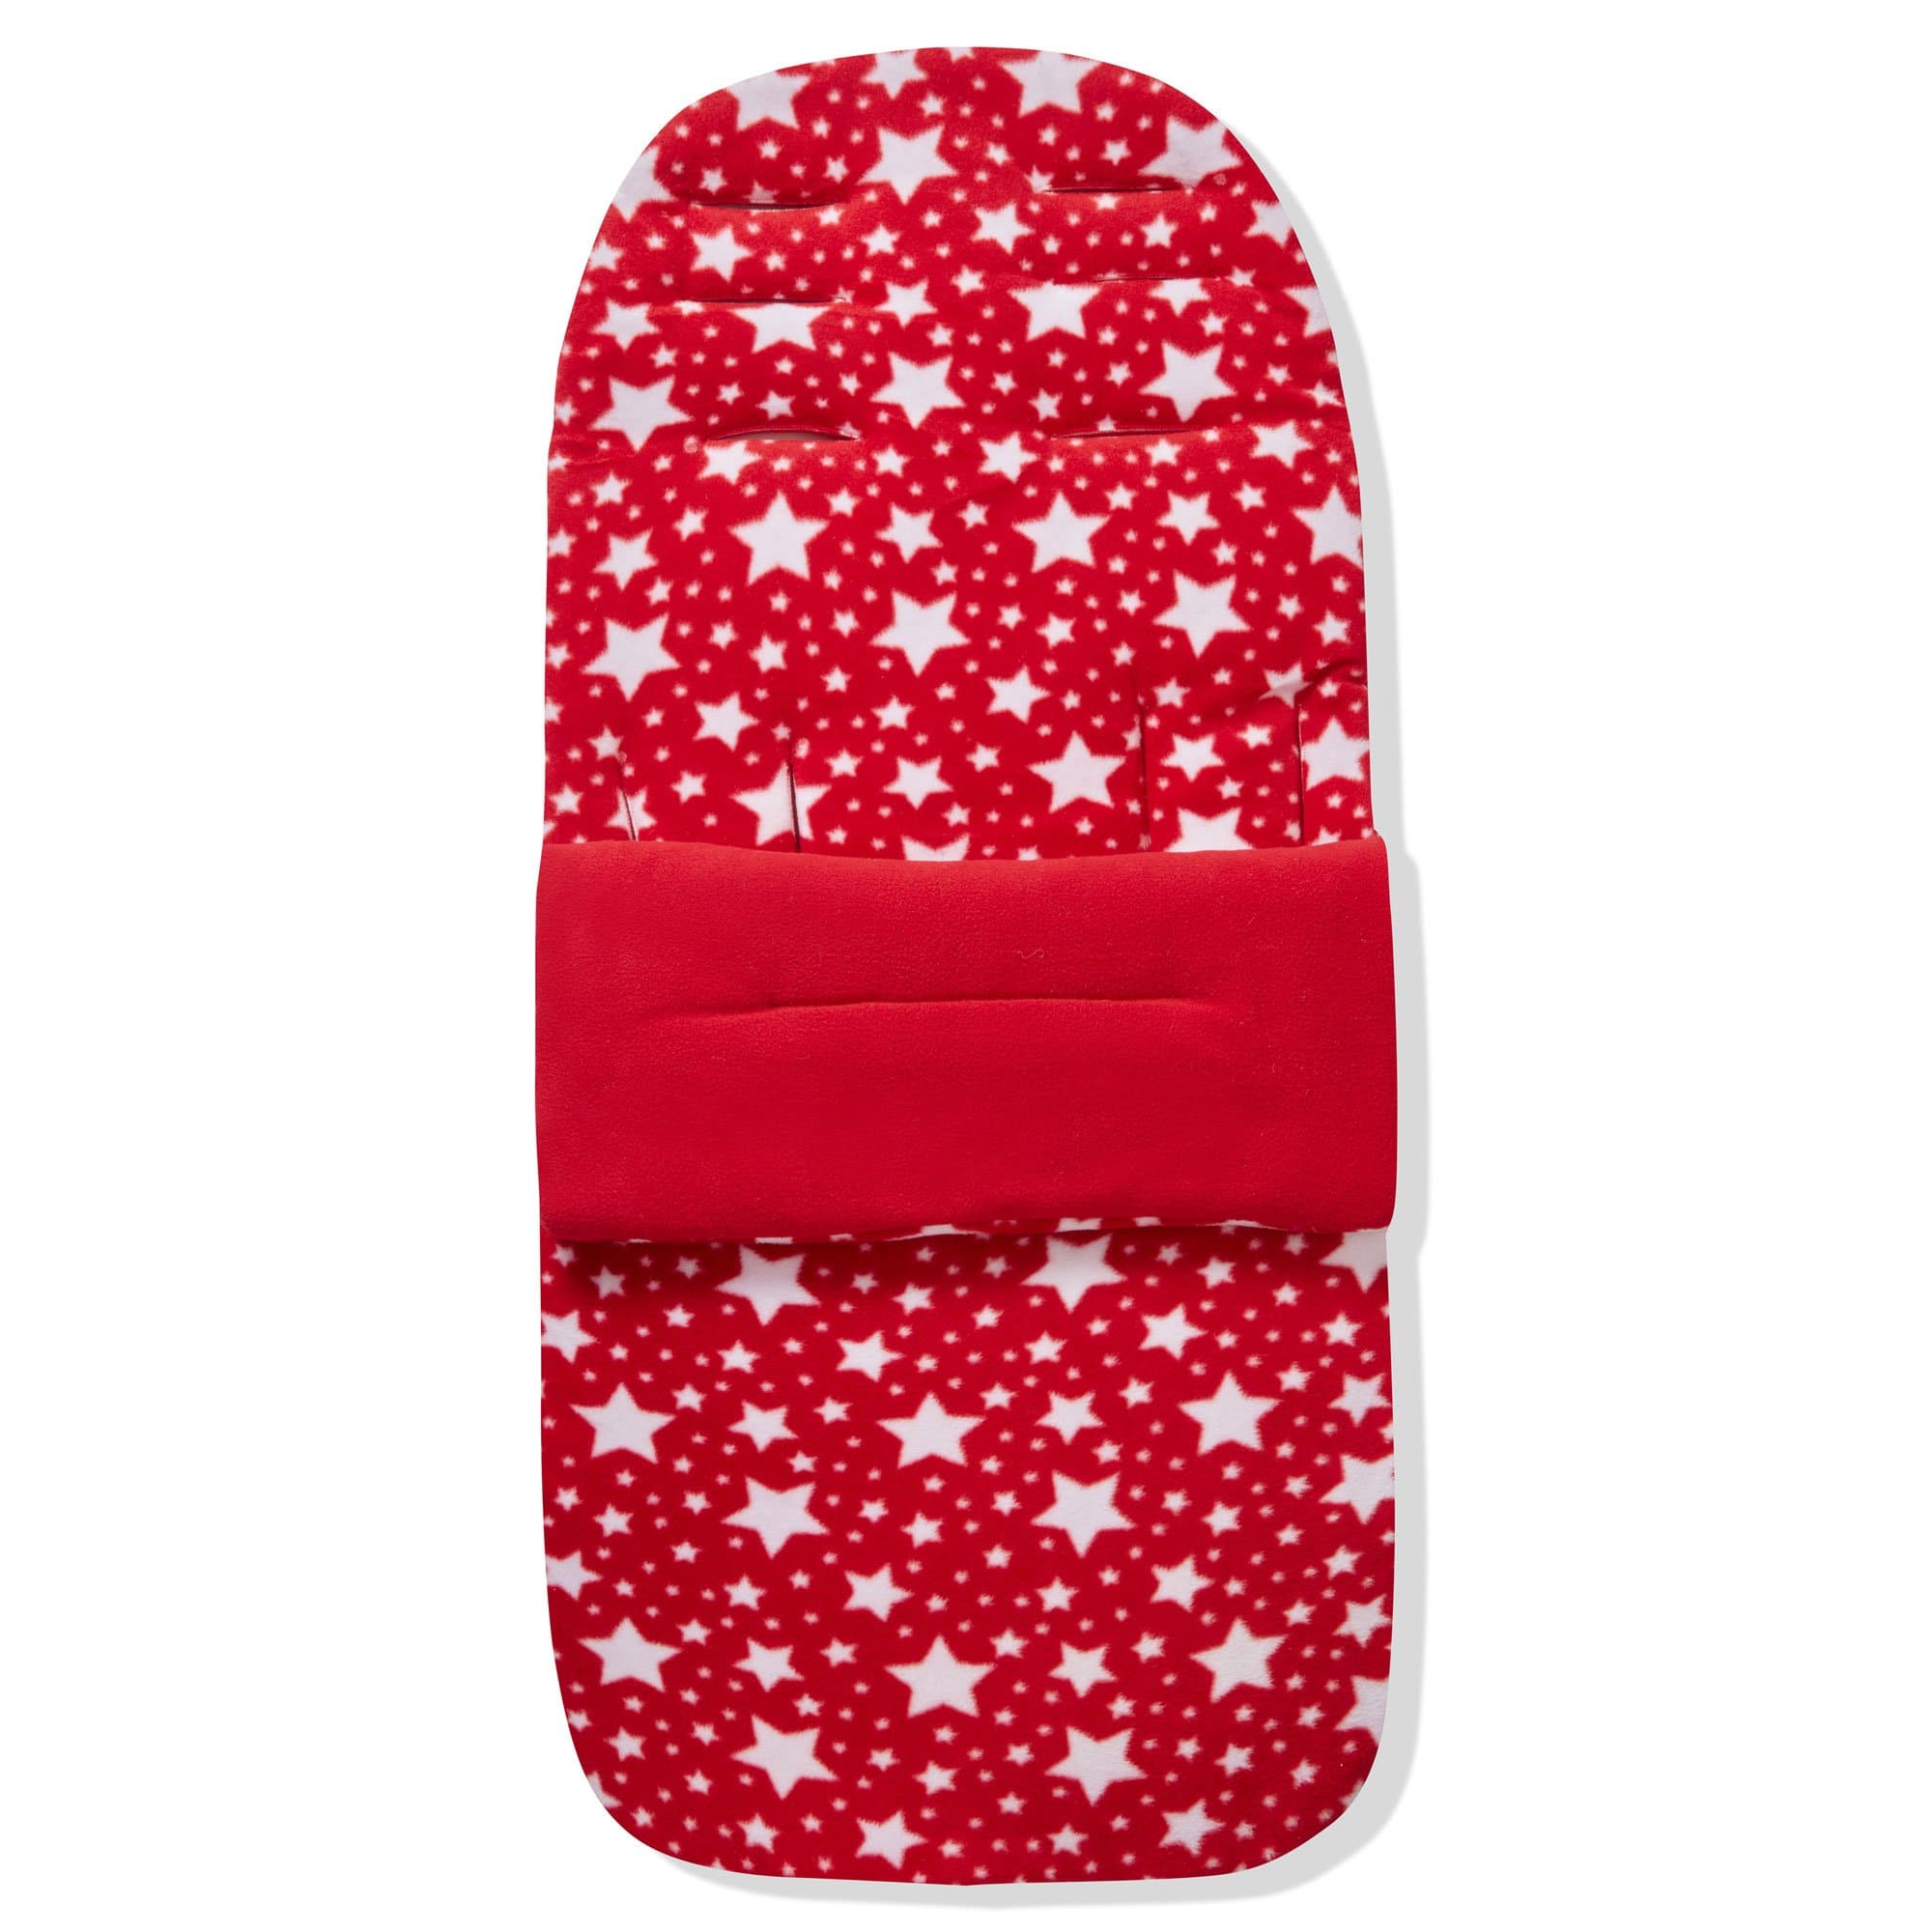 Fleece Footmuff / Cosy Toes Compatible with Stokke - For Your Little One